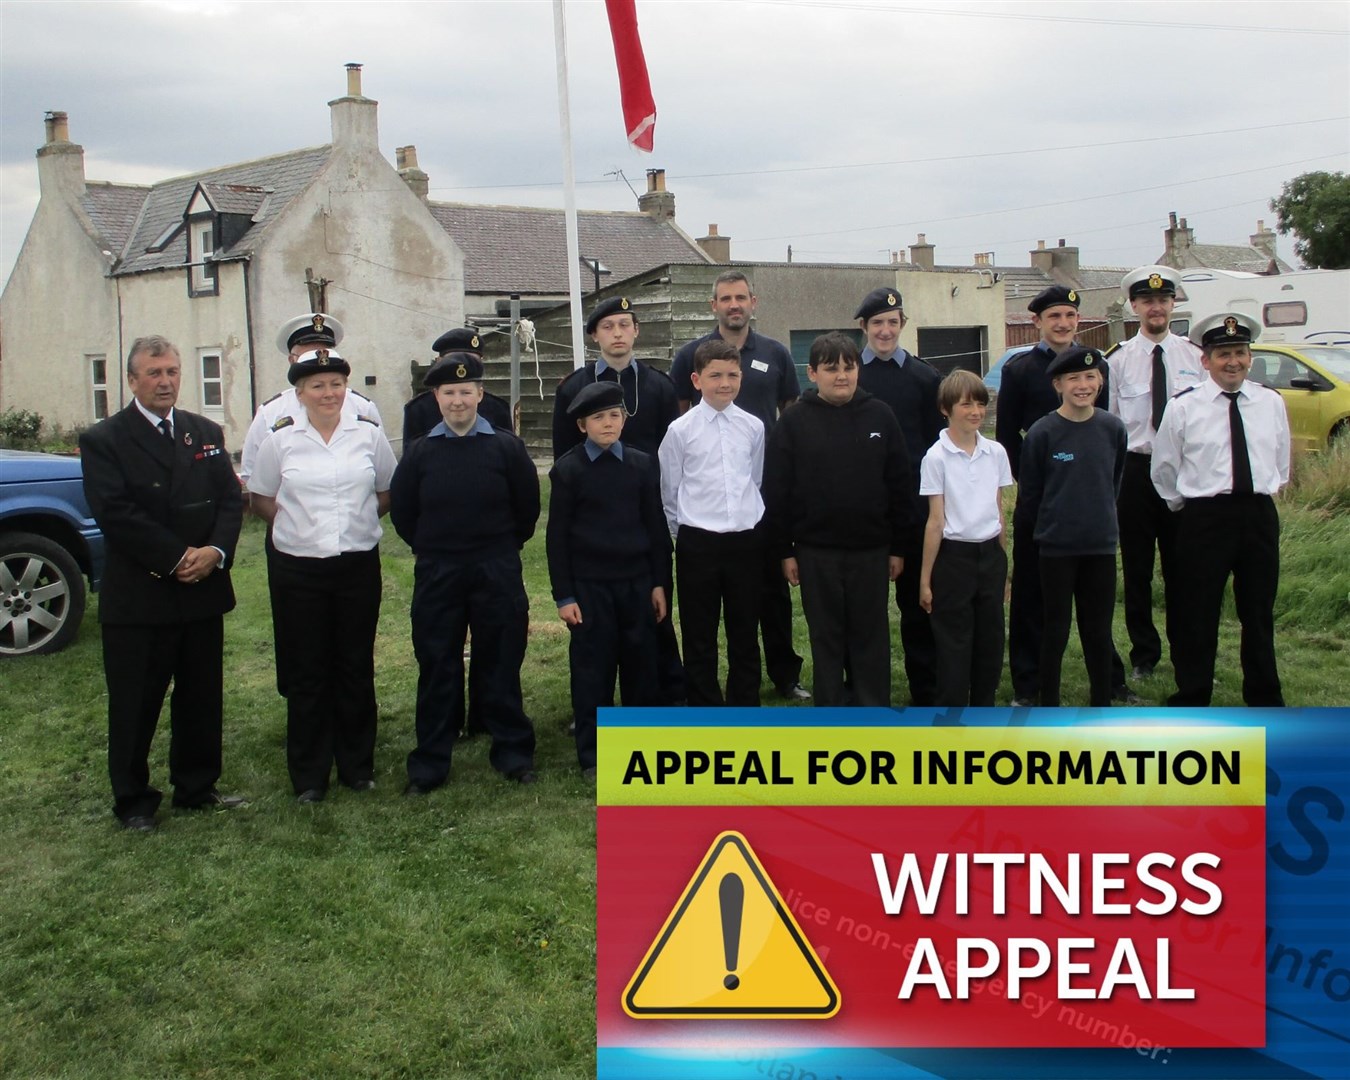 Police appeal for stolen Elgin flagpole, weeks after a similar incident took place in Kingston (pictured).